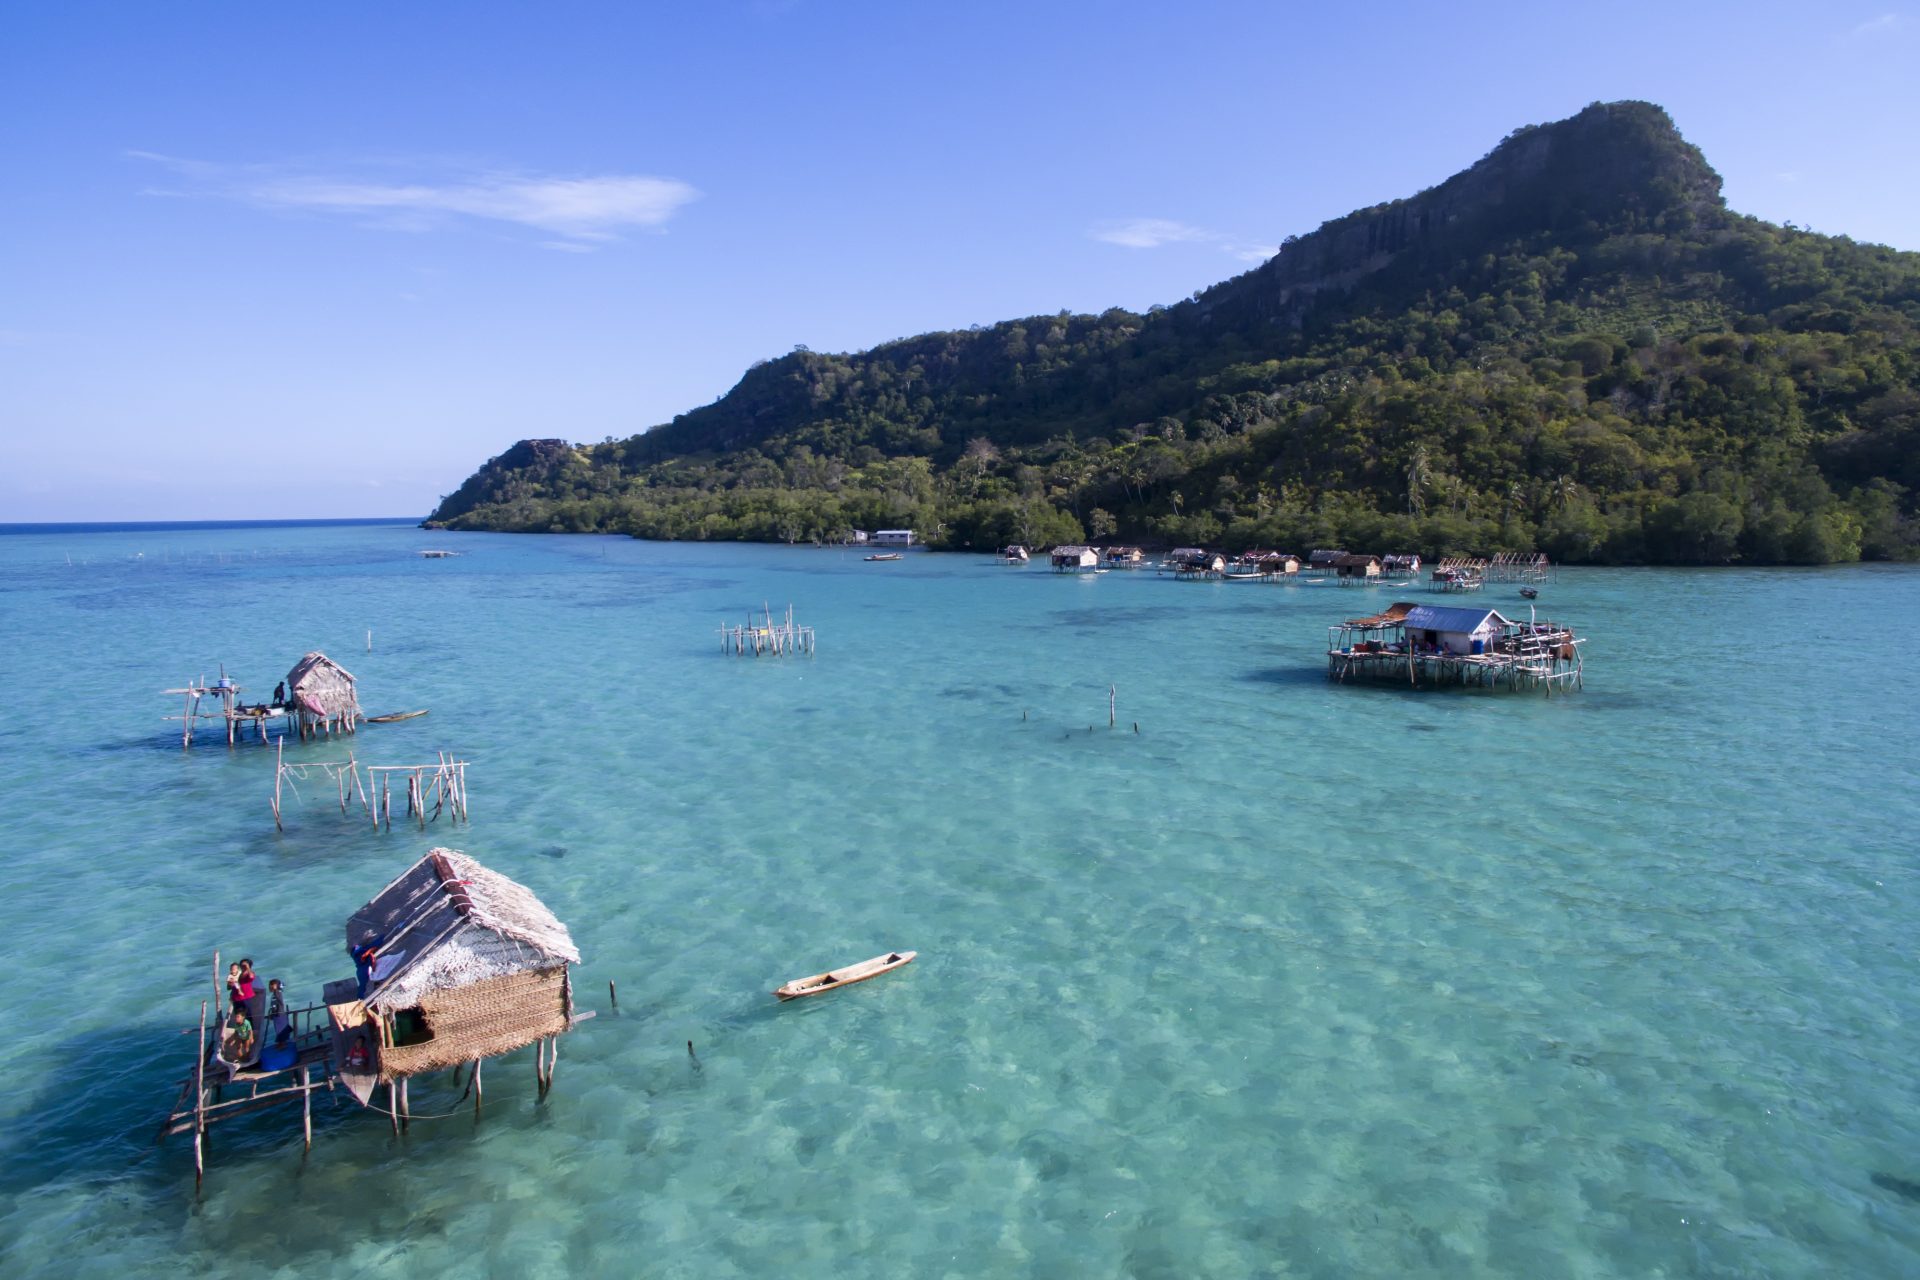 The Bajau dive in search of fish